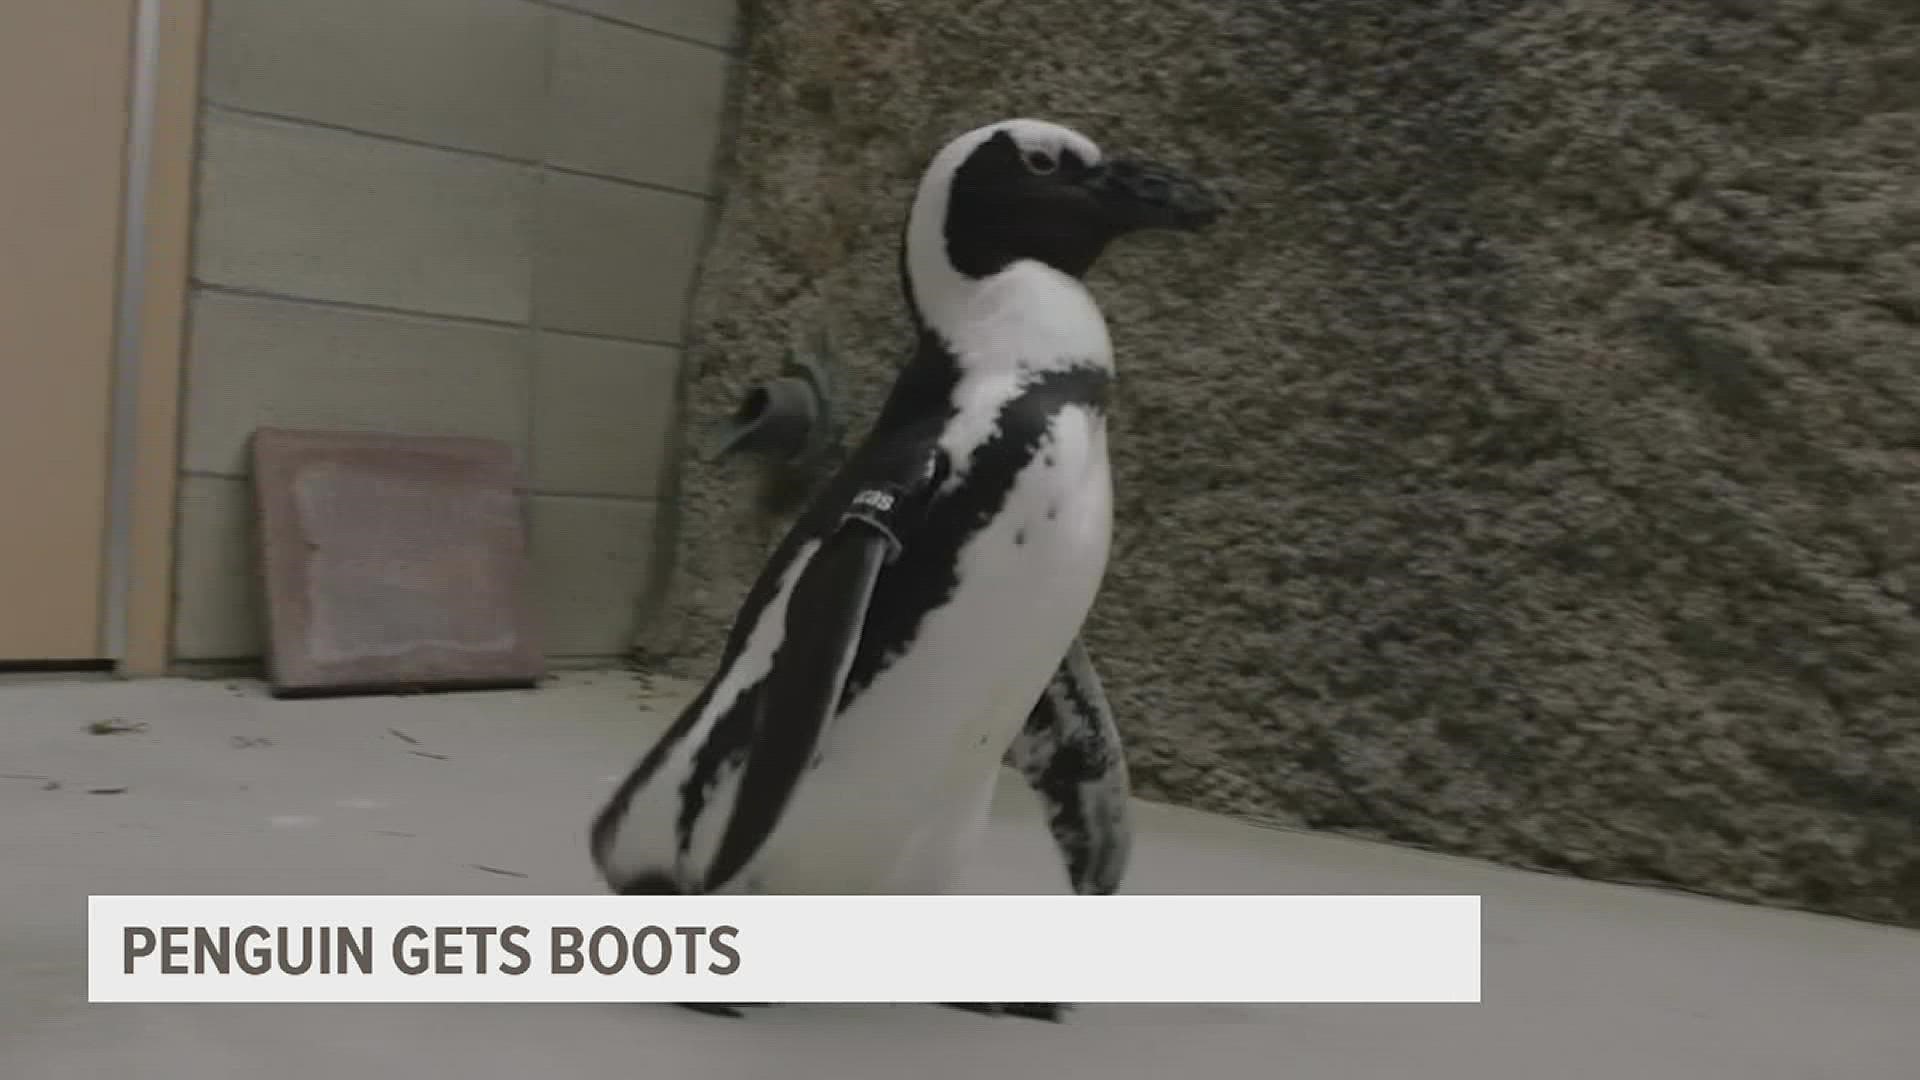 Lucas the penguin had trouble walking due to lesions on his feet due to a chronic condition, but a new pair of boots got him back on his feet.